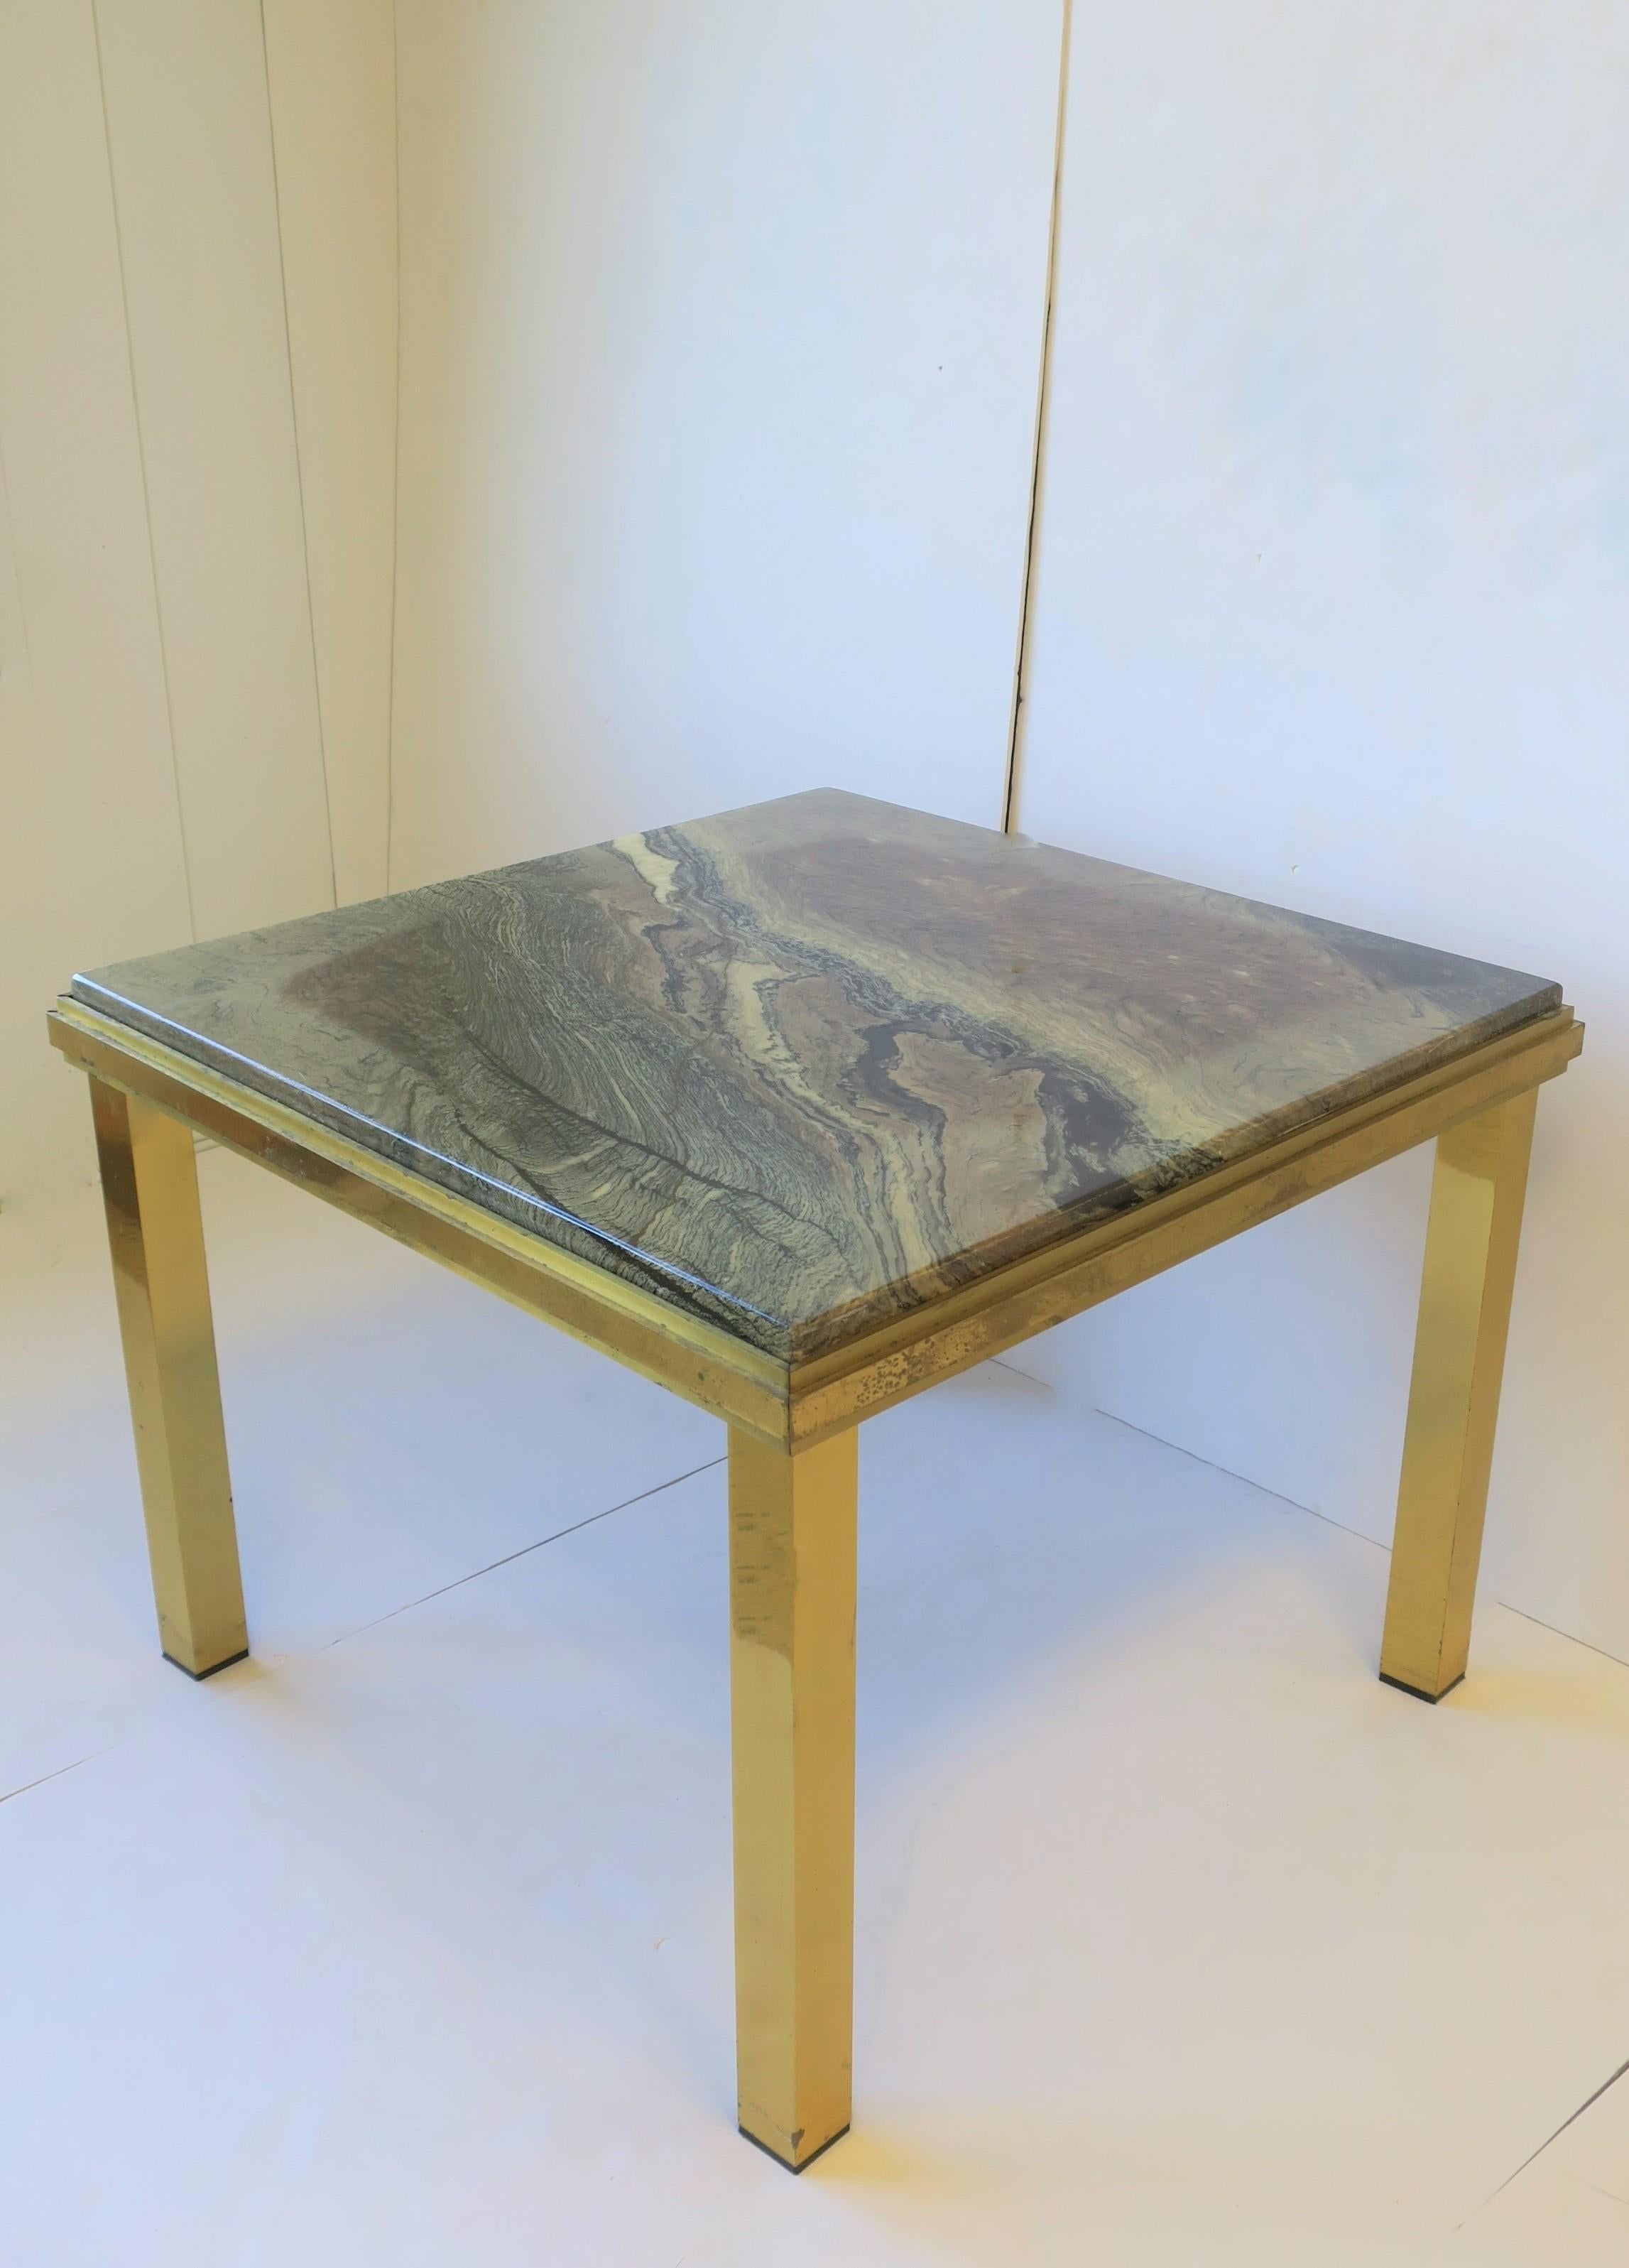 A substantial Italian '70s modern brass and marble end table, in the style of Italian designer Willy Rizzo, circa 1970s, Italy. A substantial square brass frame with a substantial partial inset neutral multicolored marble top. Marble top colors